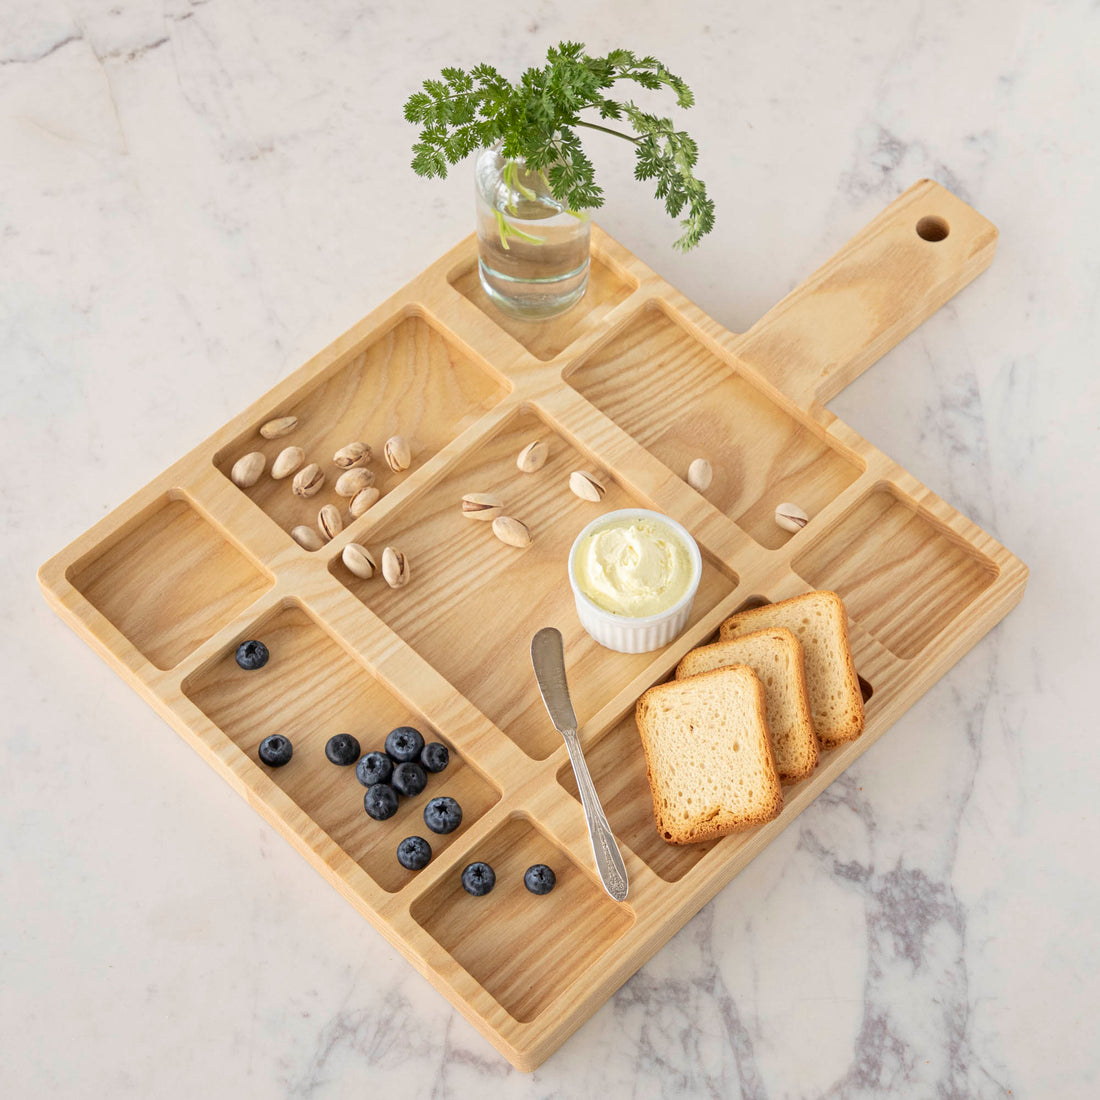 A JK Adams Ash Divided Serving Board with compartments holding pistachios, blueberries, crackers, and a dip, next to a small vase with greenery.